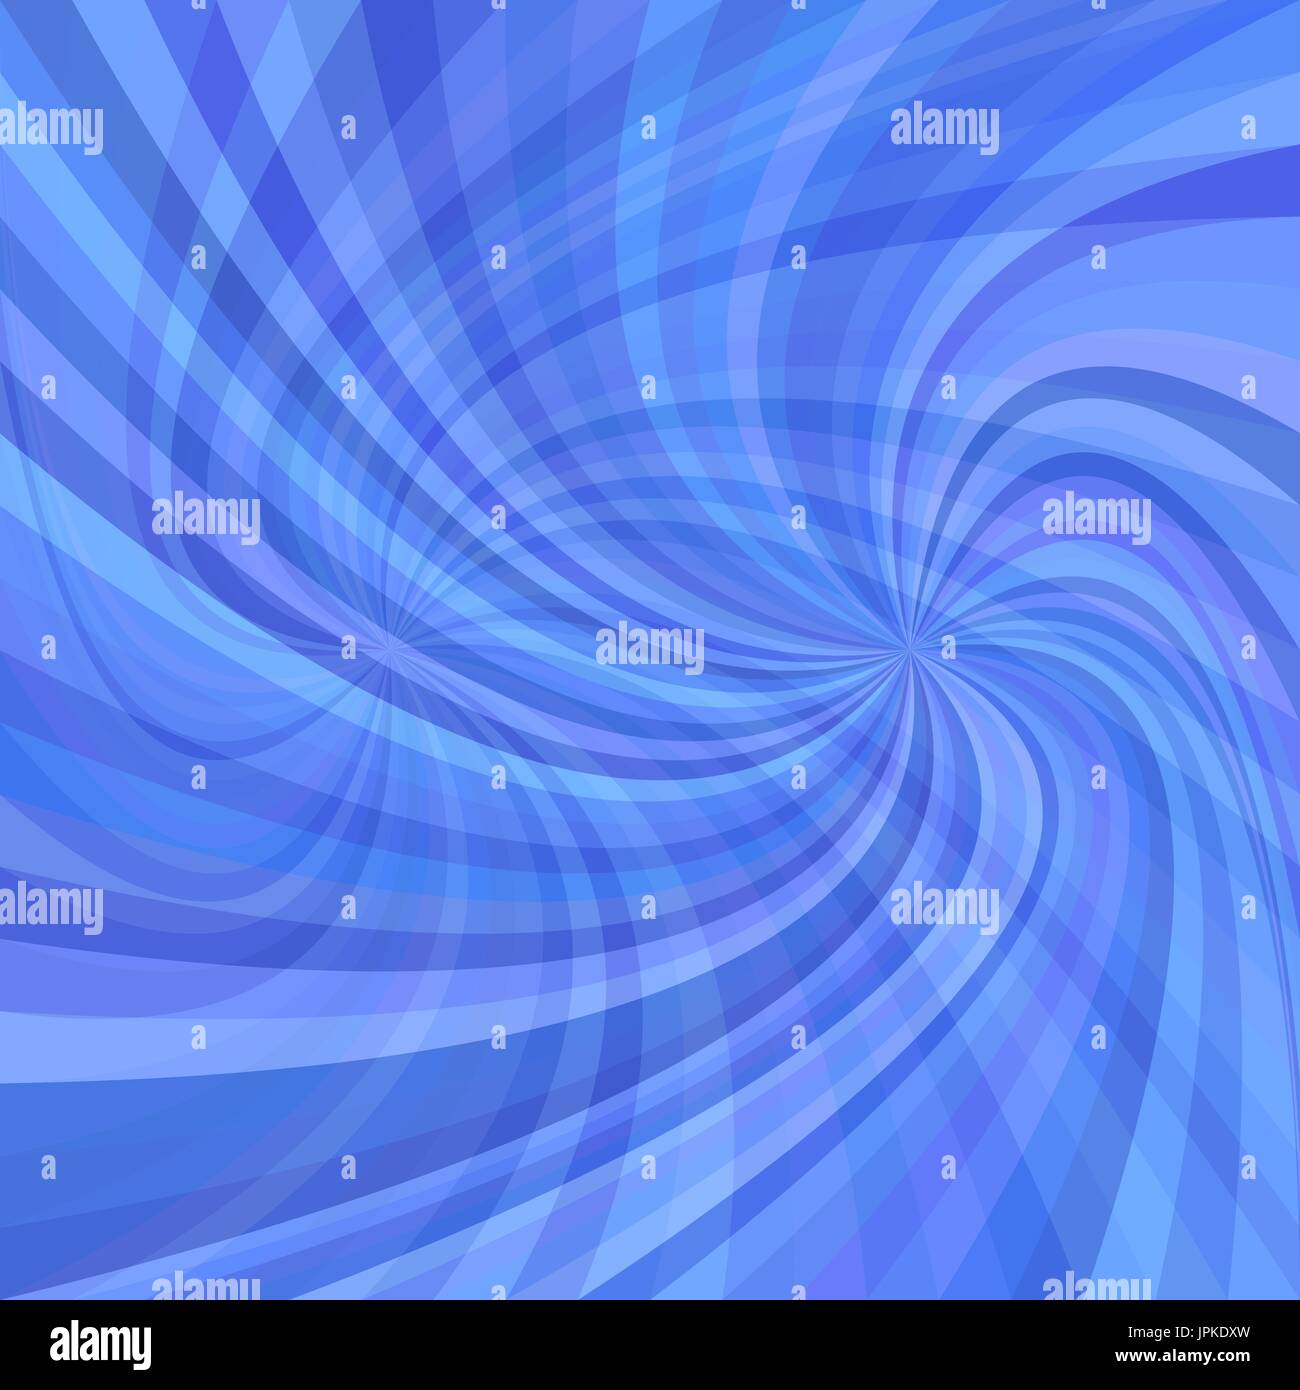 Abstract double spiral background - vector illustration from spun rays in blue tones Stock Vector